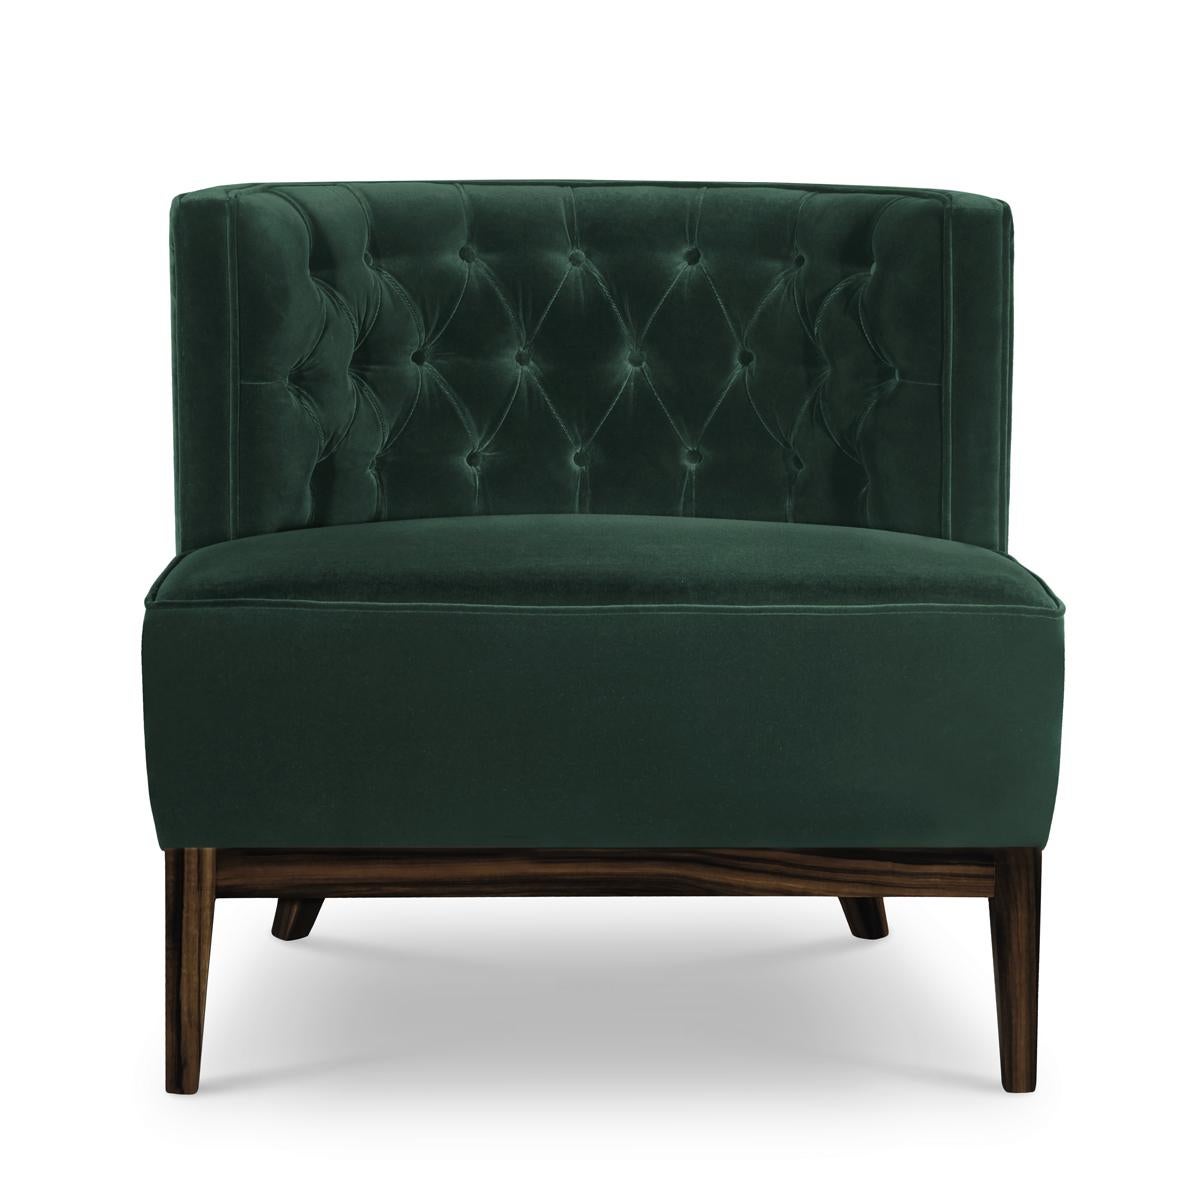 Armchair Pasadena with structure in solid wood,
upholstered and covered with high quality British
green velvet fabric. With capitonated back seat.
Also available with other fabrics on request.